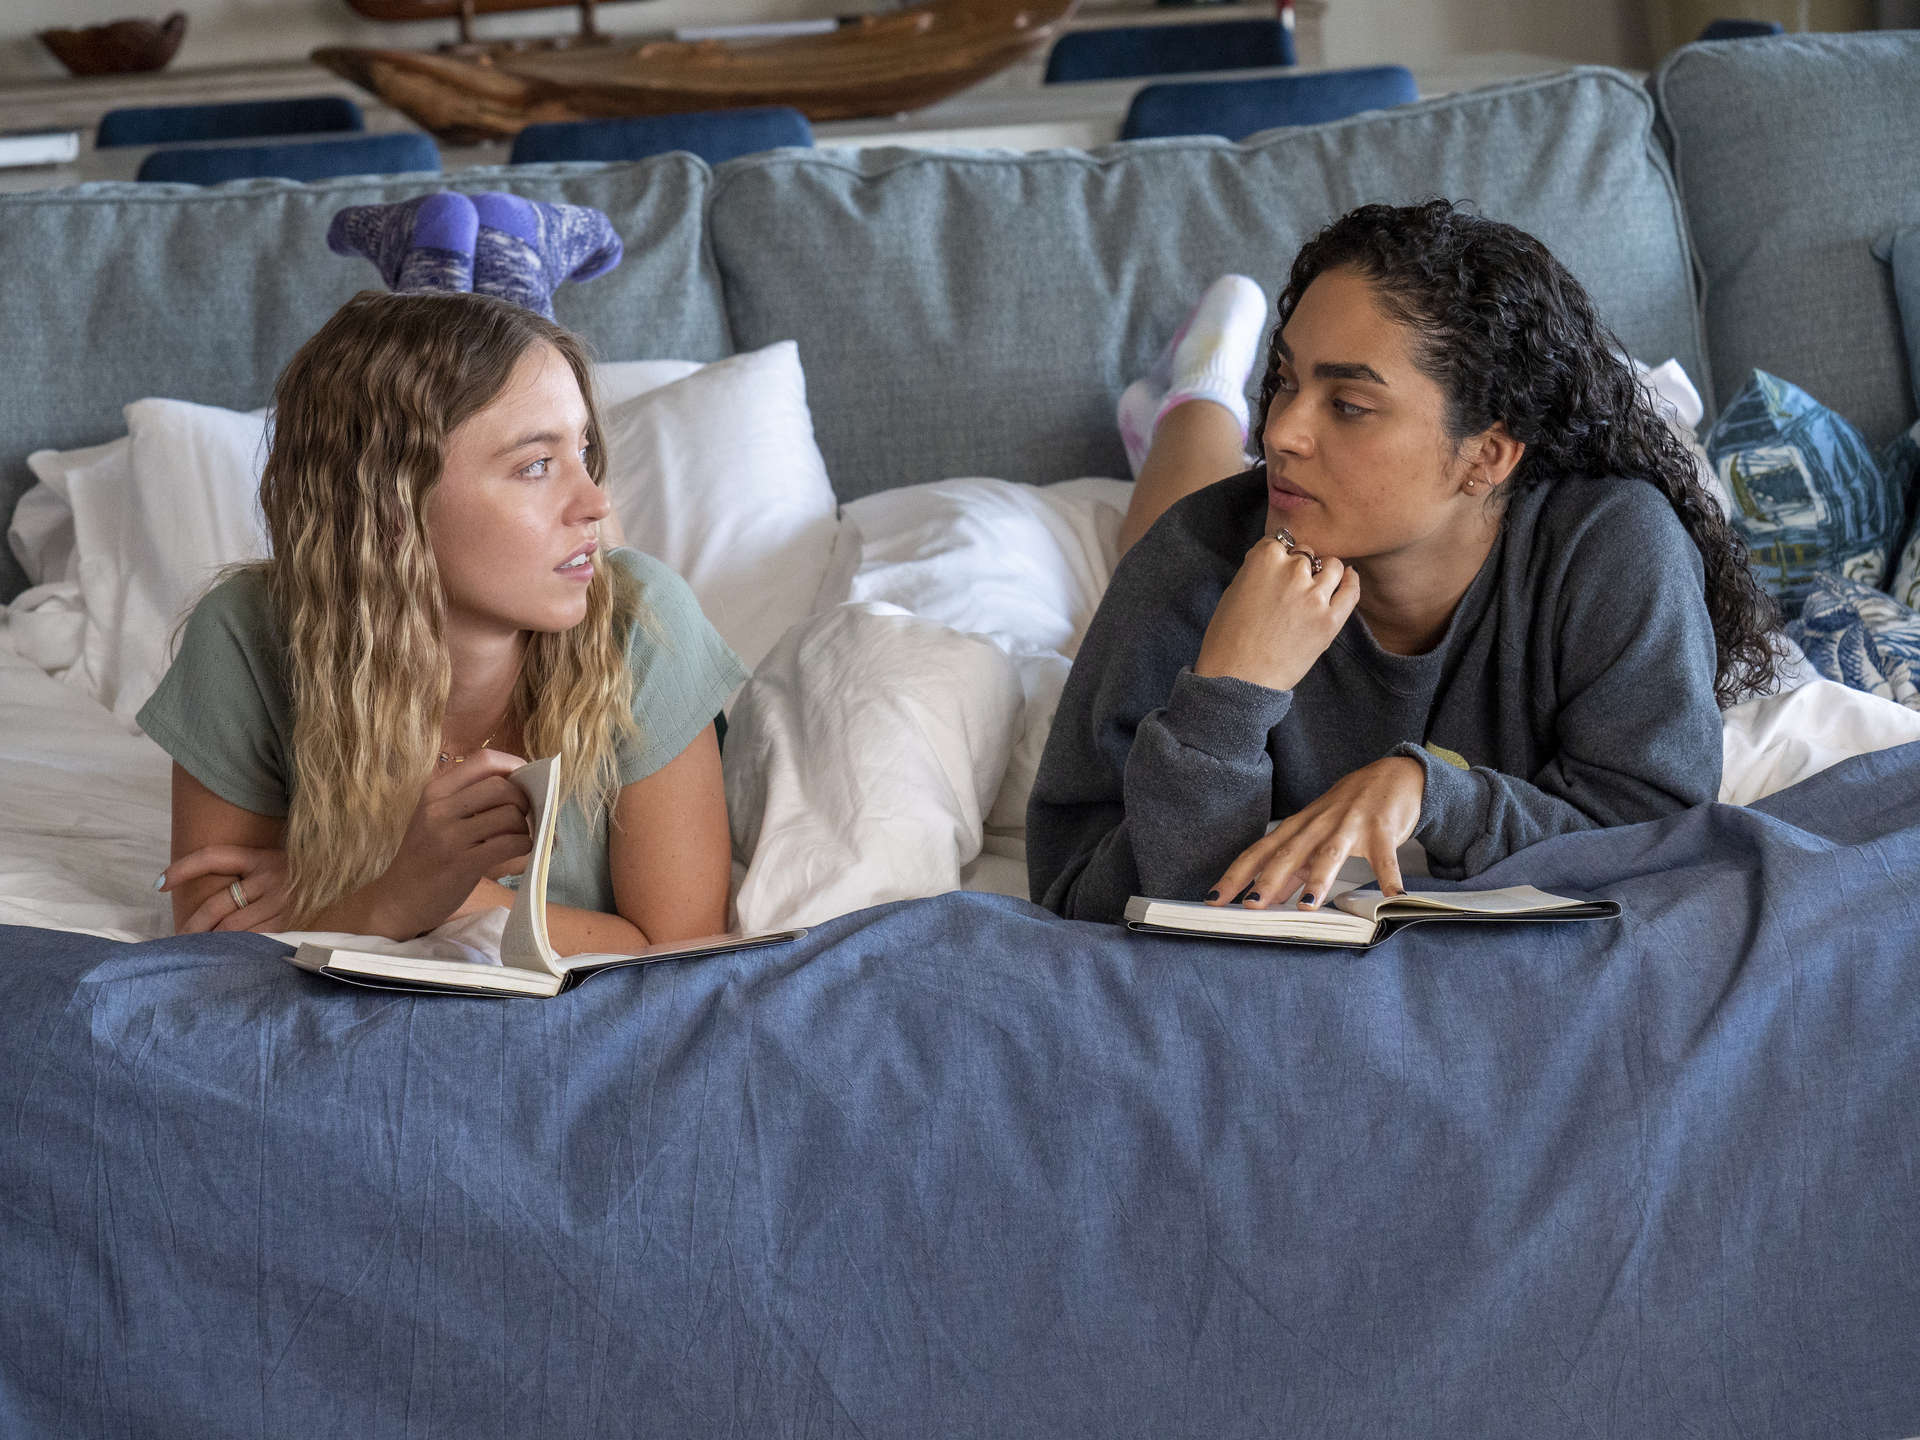 Two young women are in bed together in this photo from Rip Cord Productions